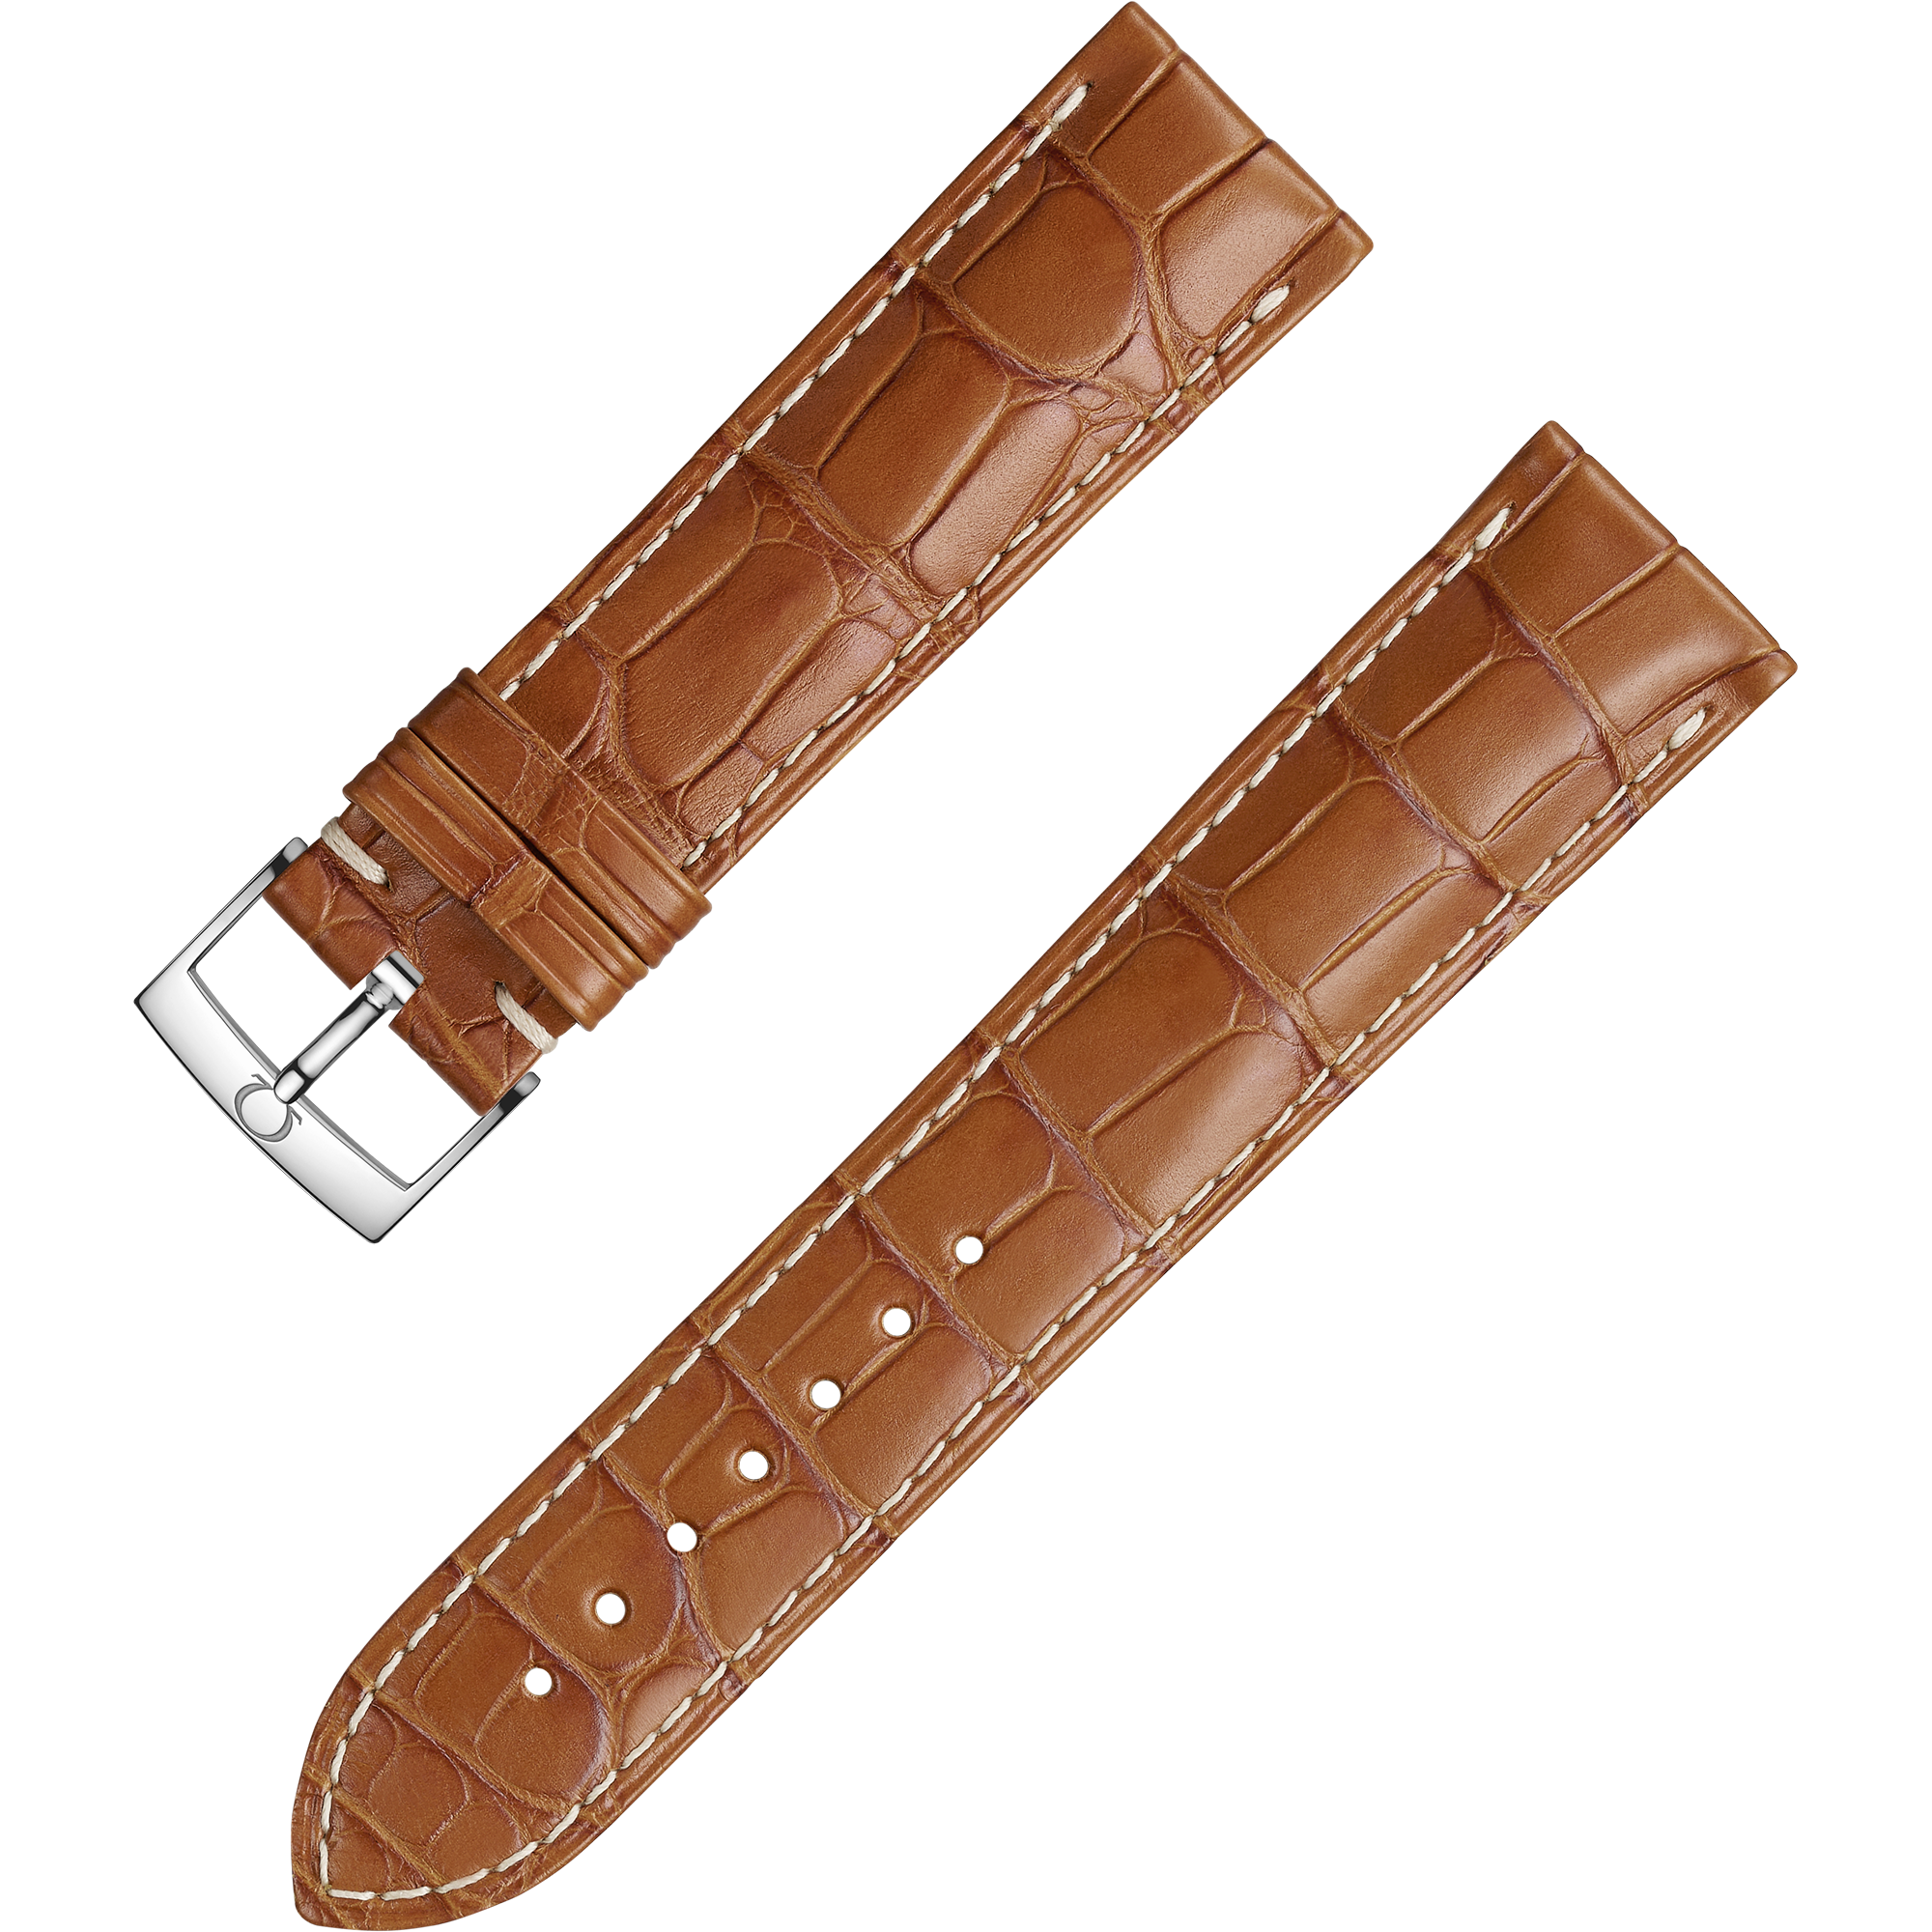 Two-piece strap - Golden brown alligator leather strap with pin buckle - 032CUZ007256W